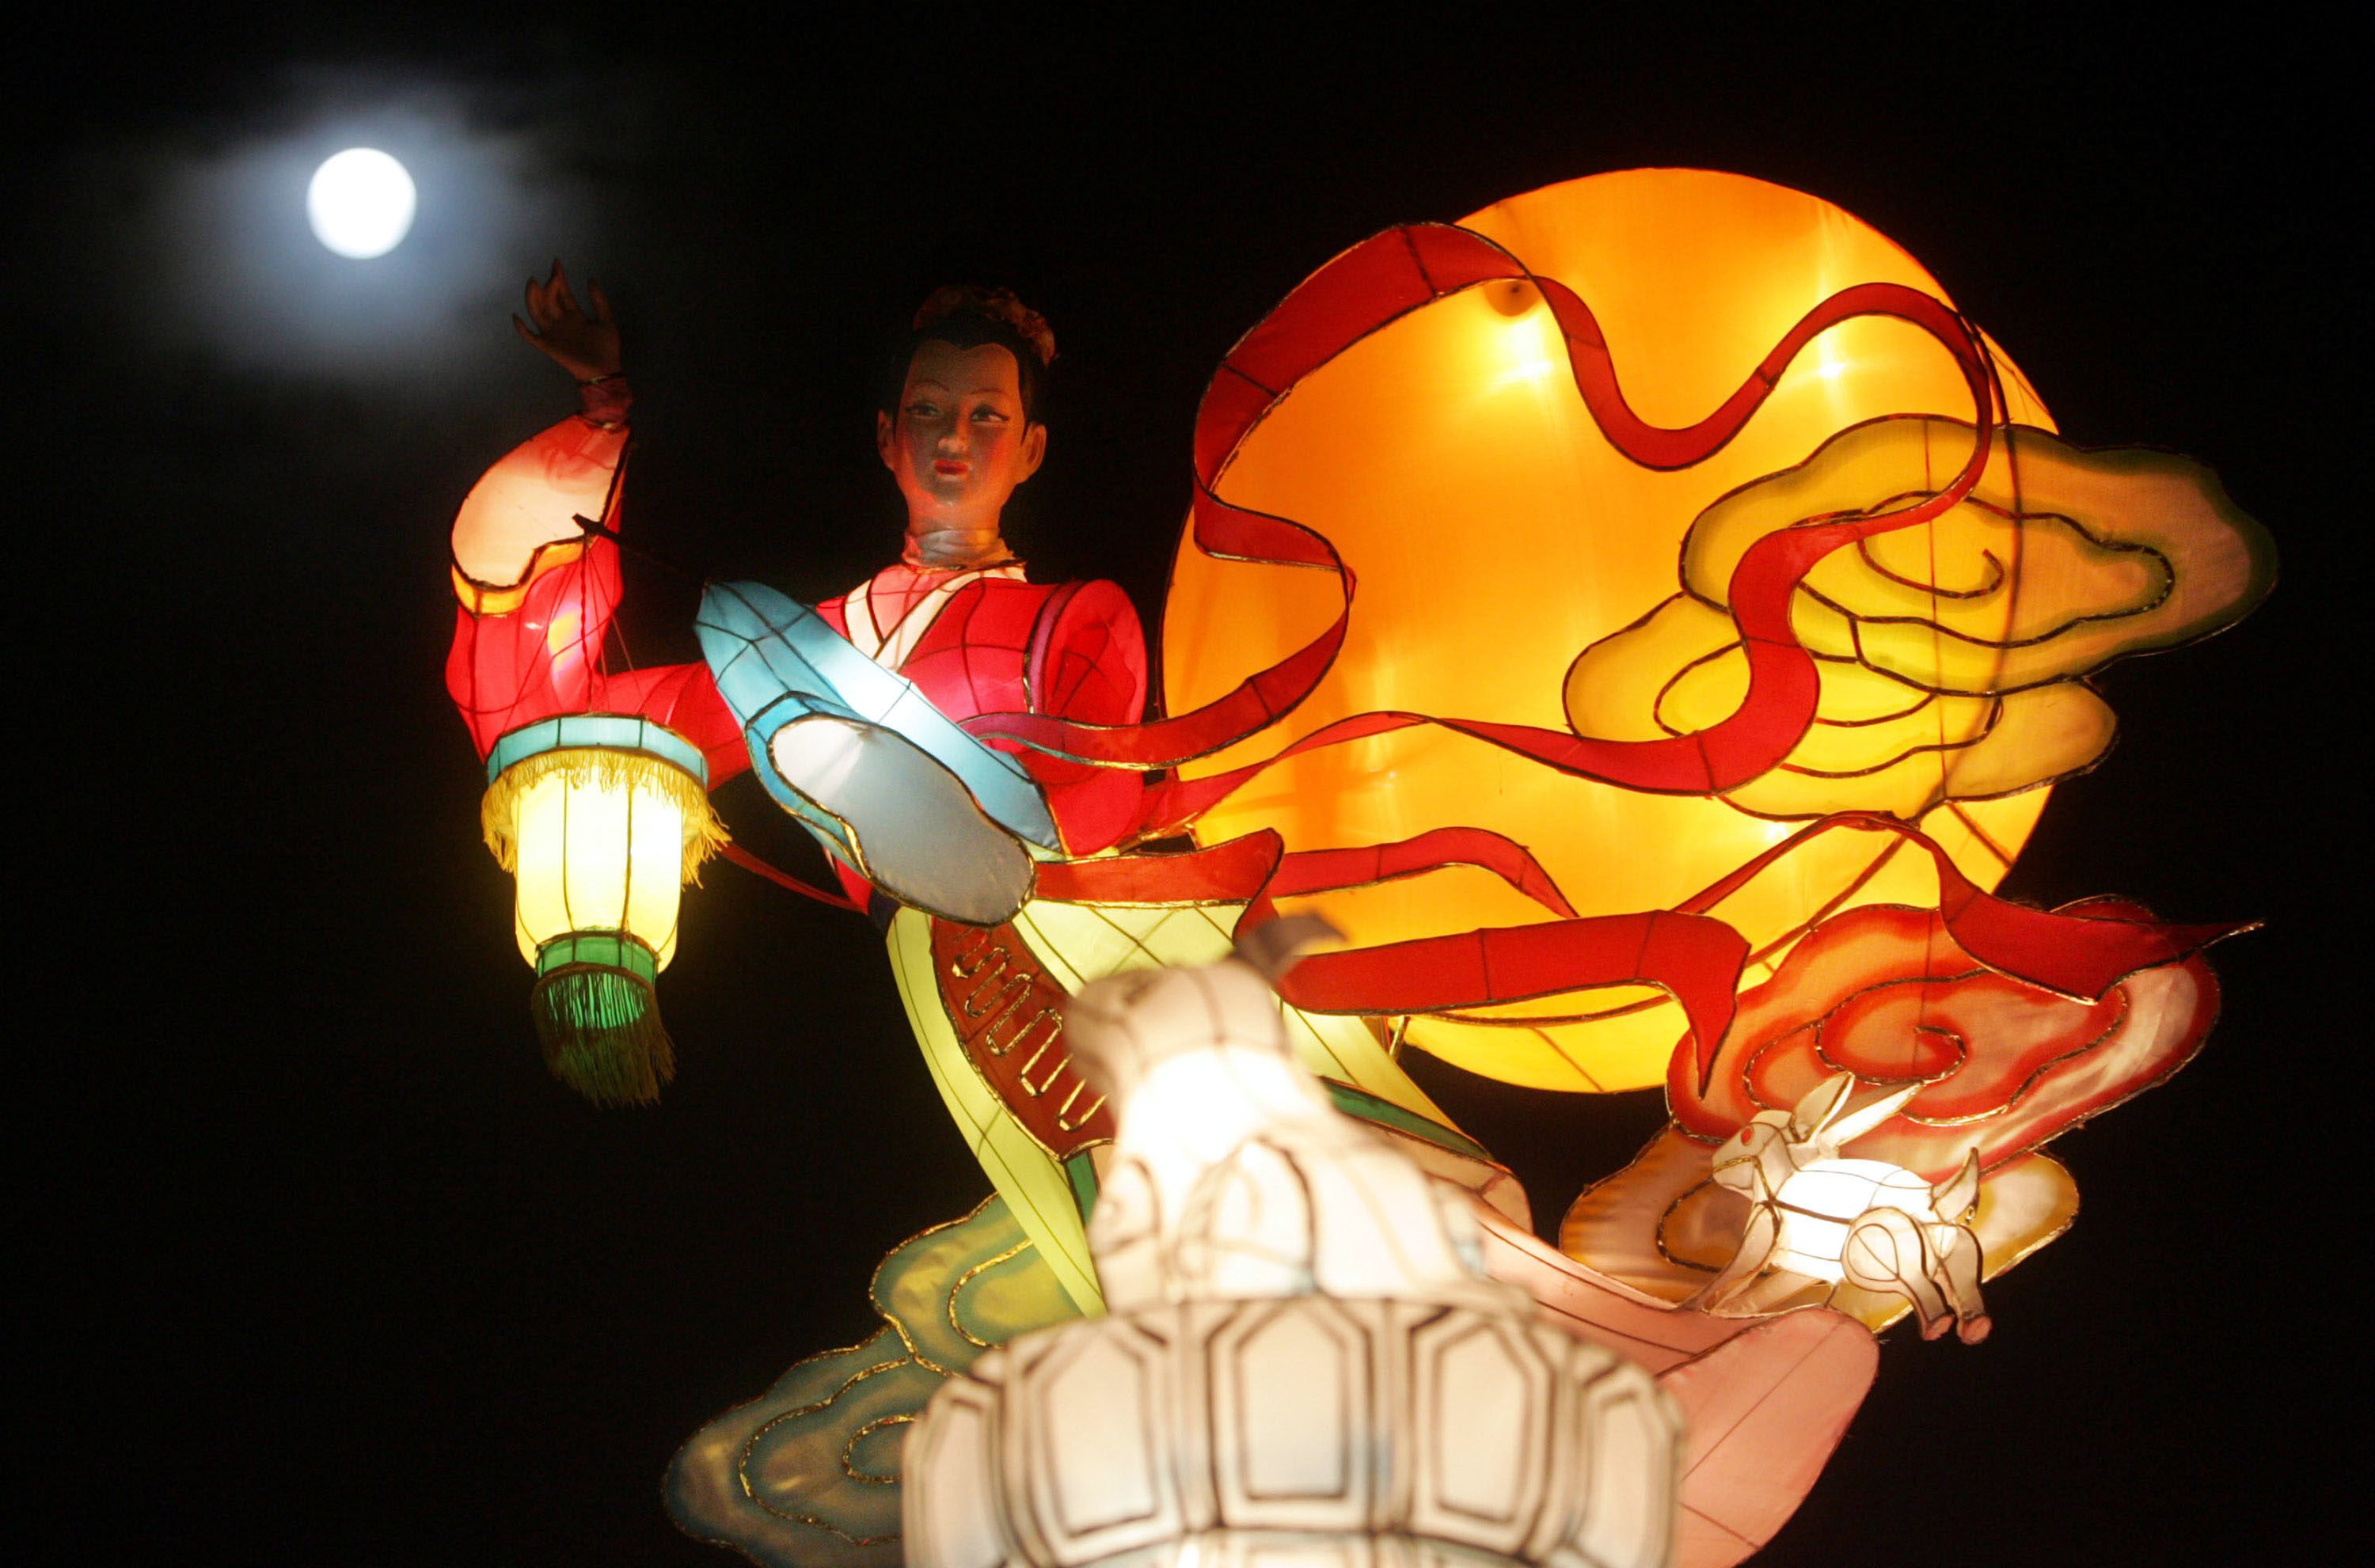 A light display featuring Chinese moon goddess Chang’e during a Mid-Autumn Festival celebration in Guangzhou, China. Photo: Getty Images